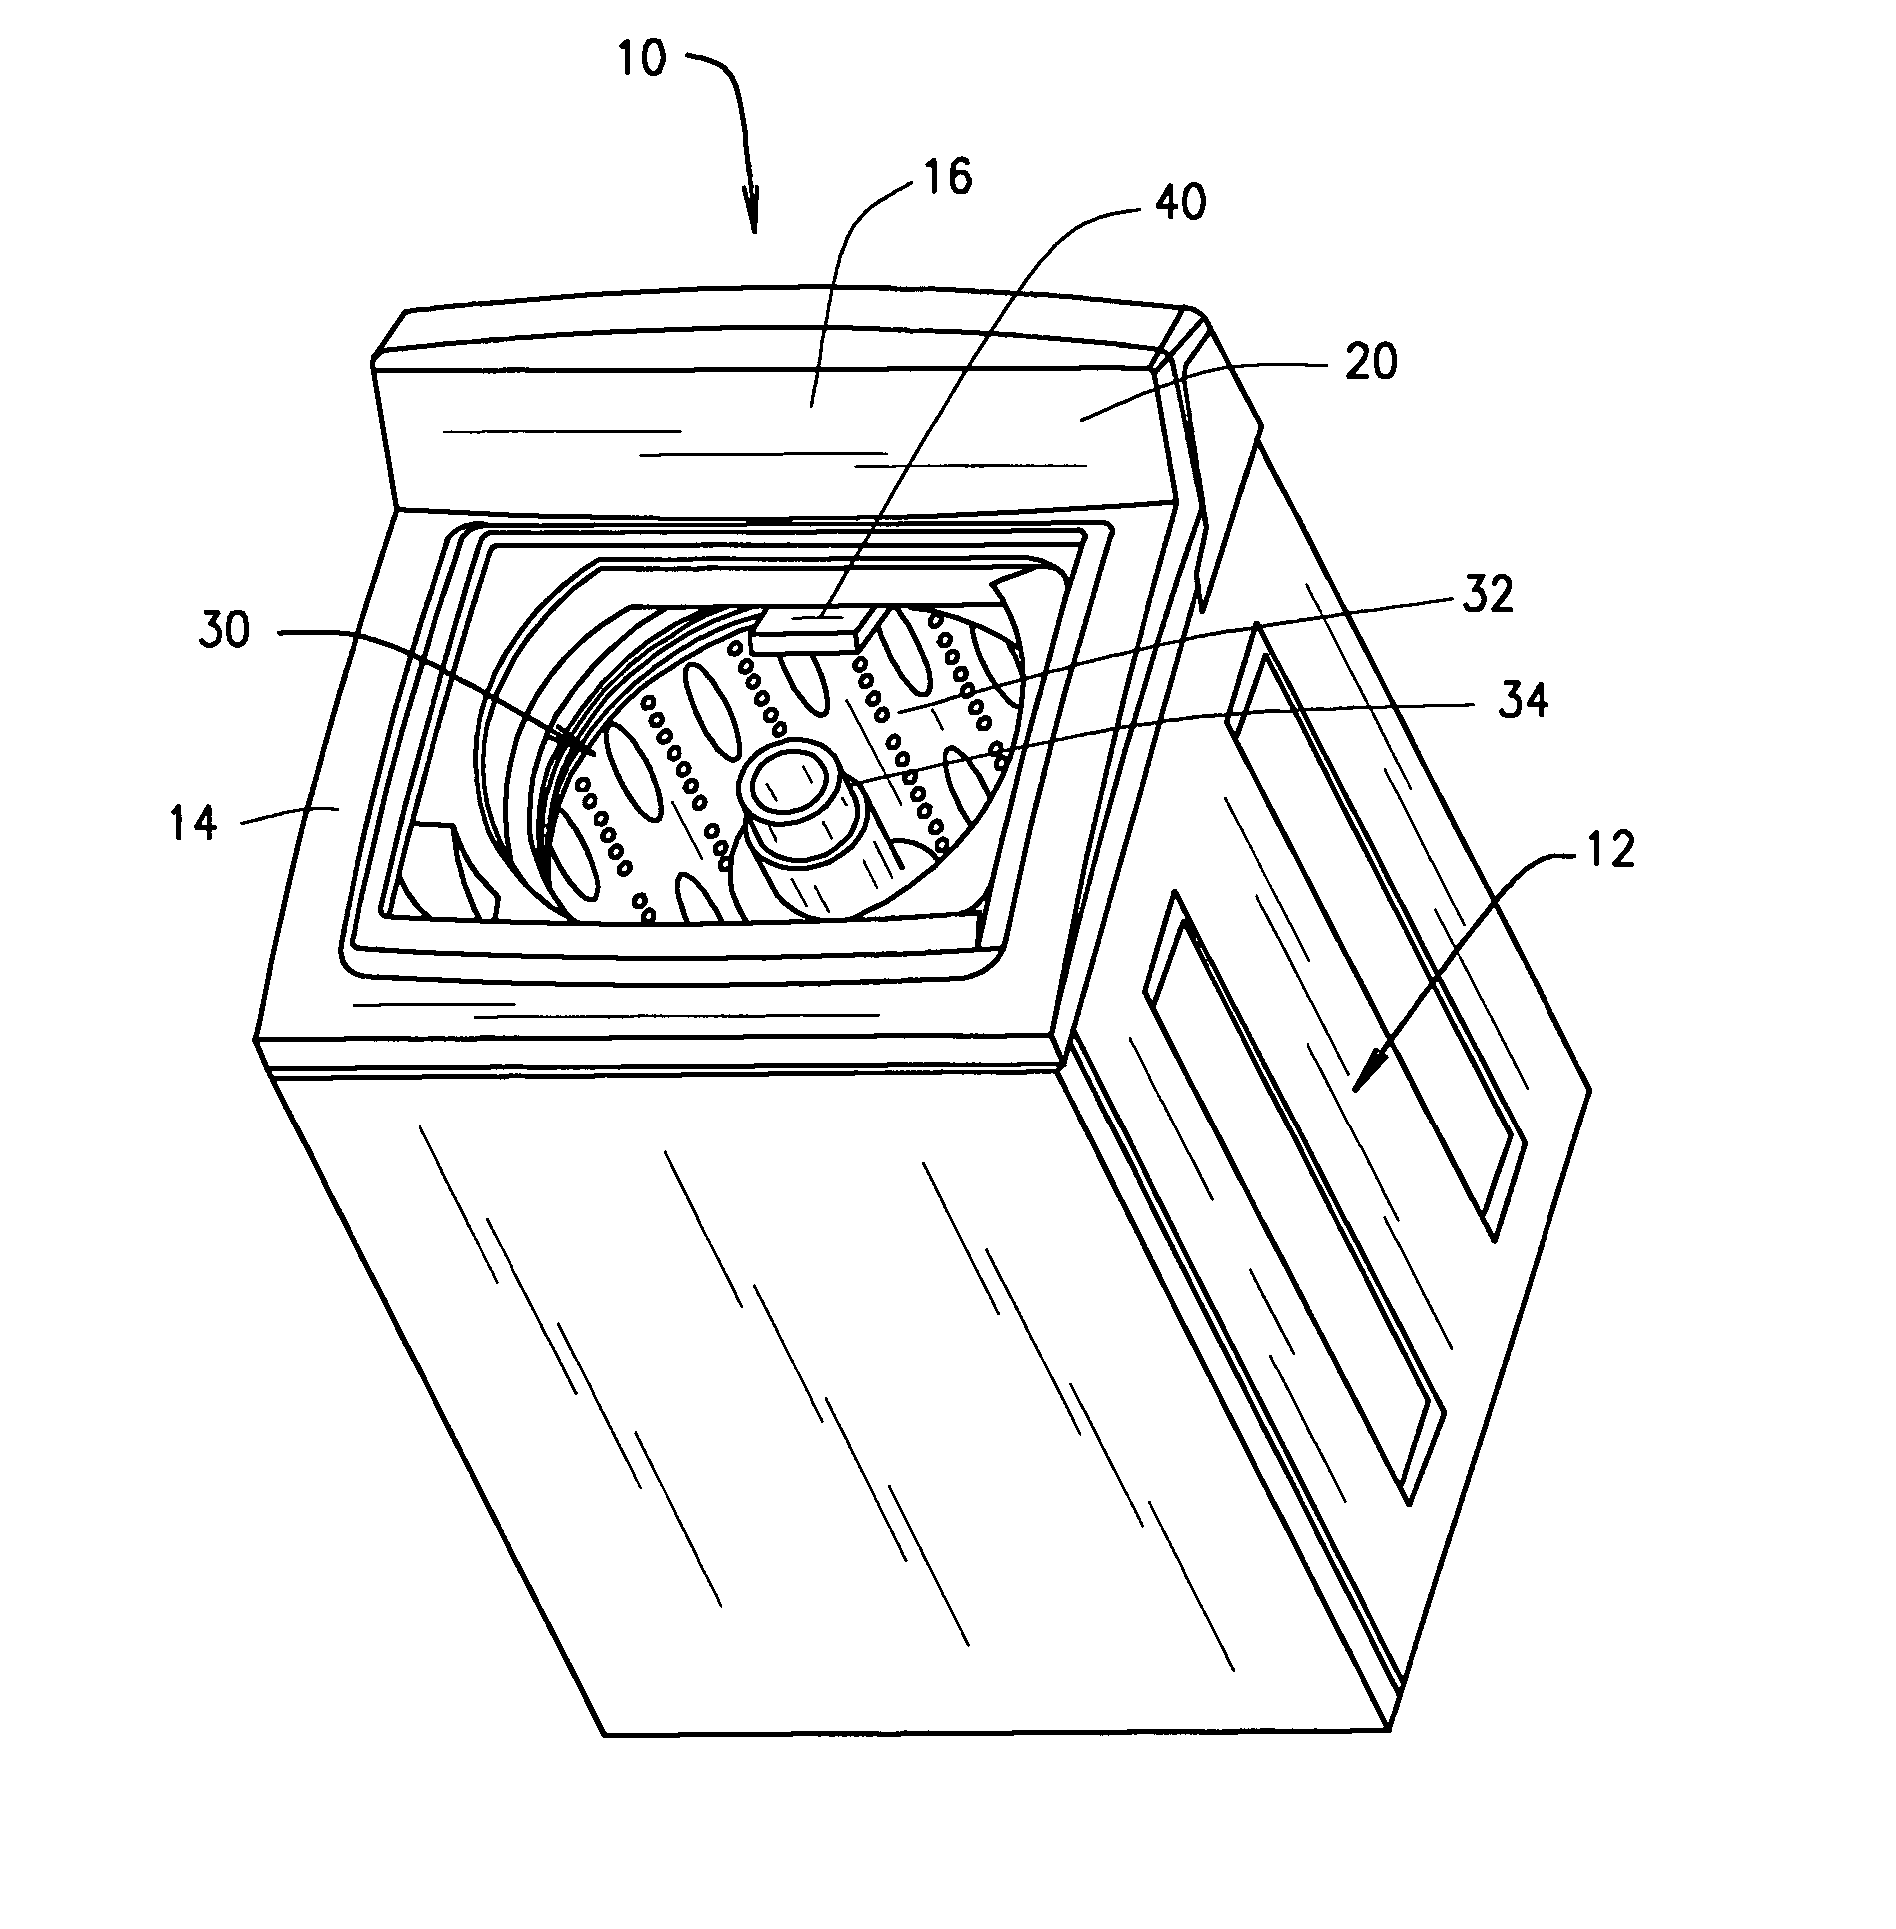 Spray fill device and method for using the same